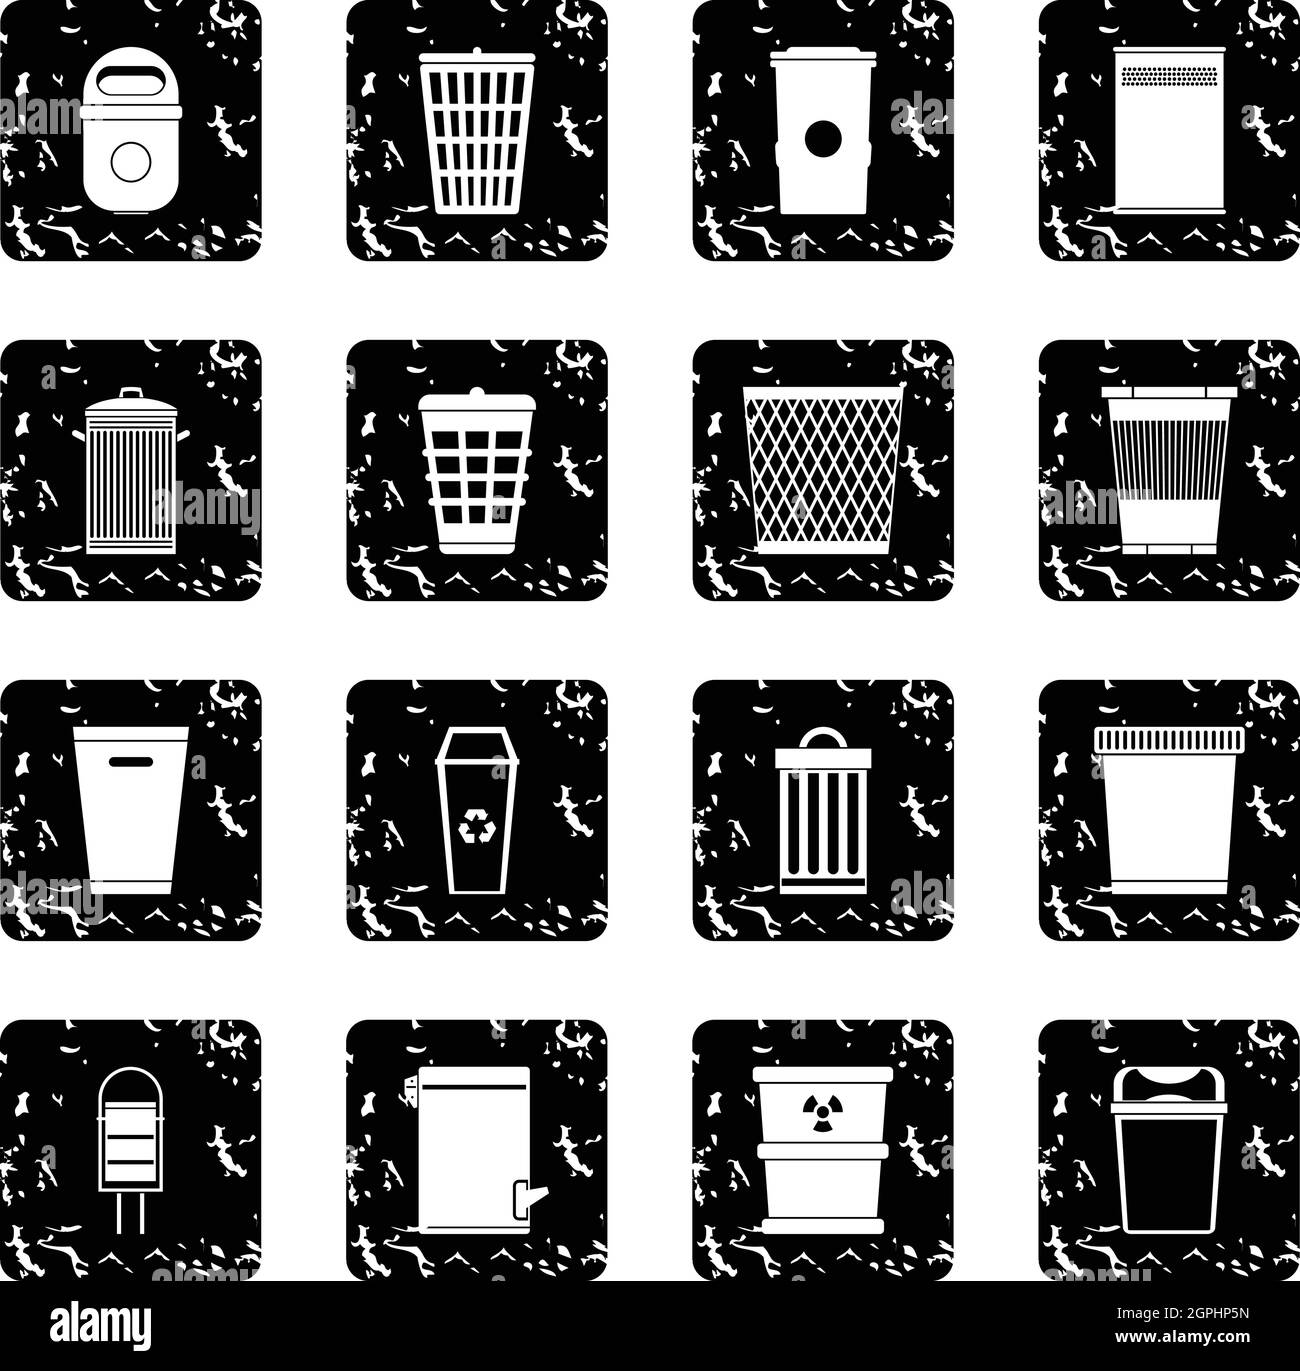 Trash can set icons, grunge style Stock Vector